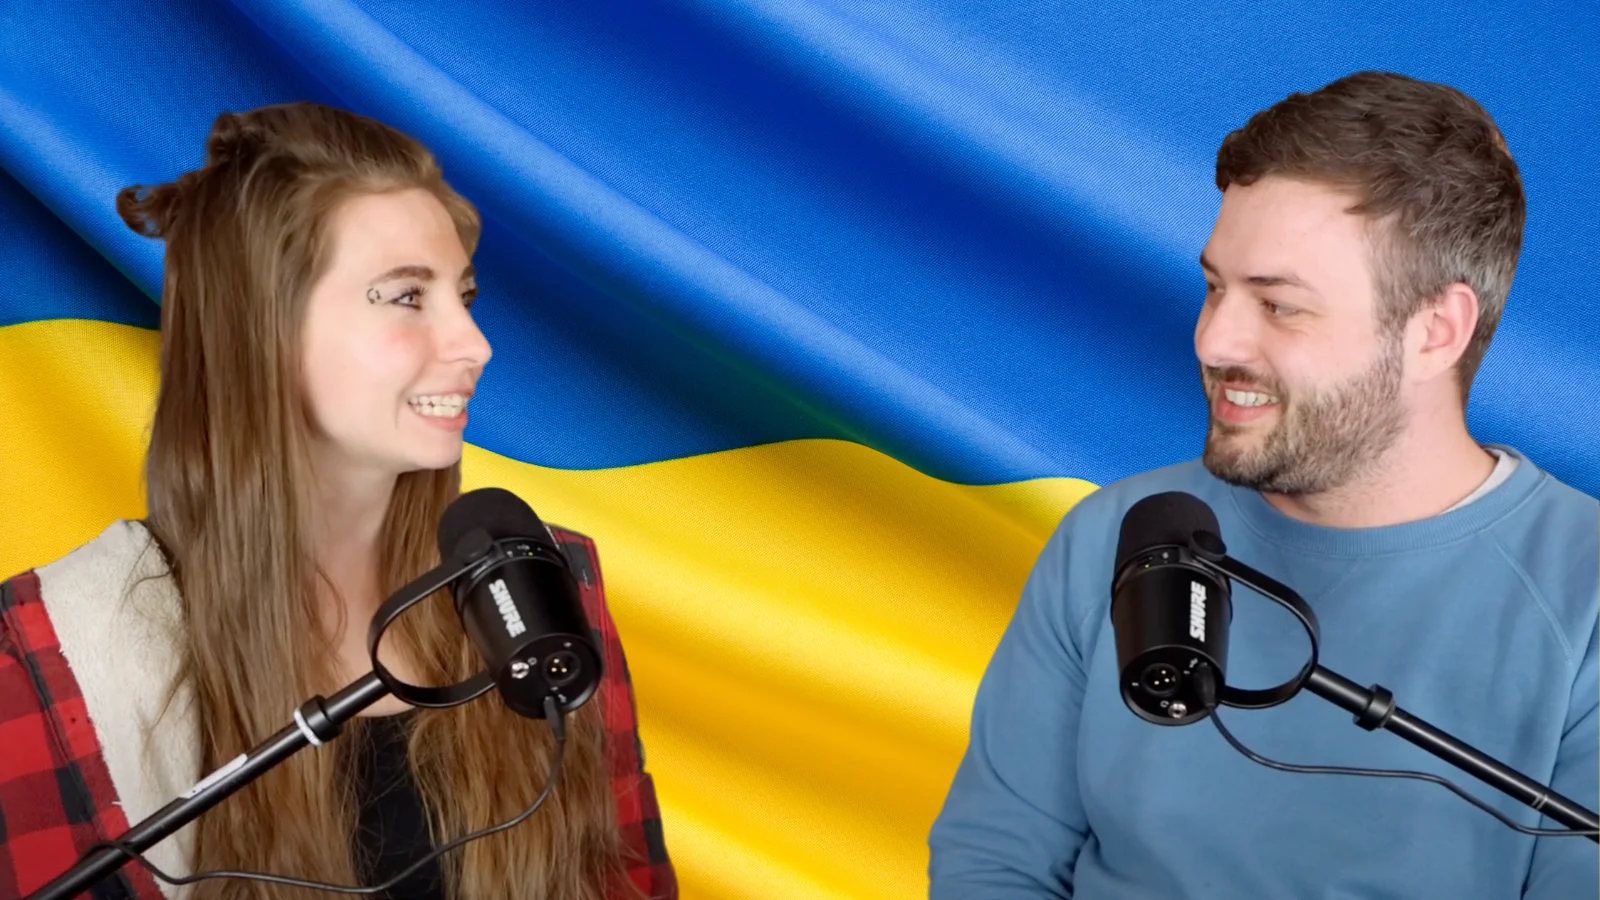 missionary interviews a Ukrainian counselor working with Ukrainians refugees in Germany